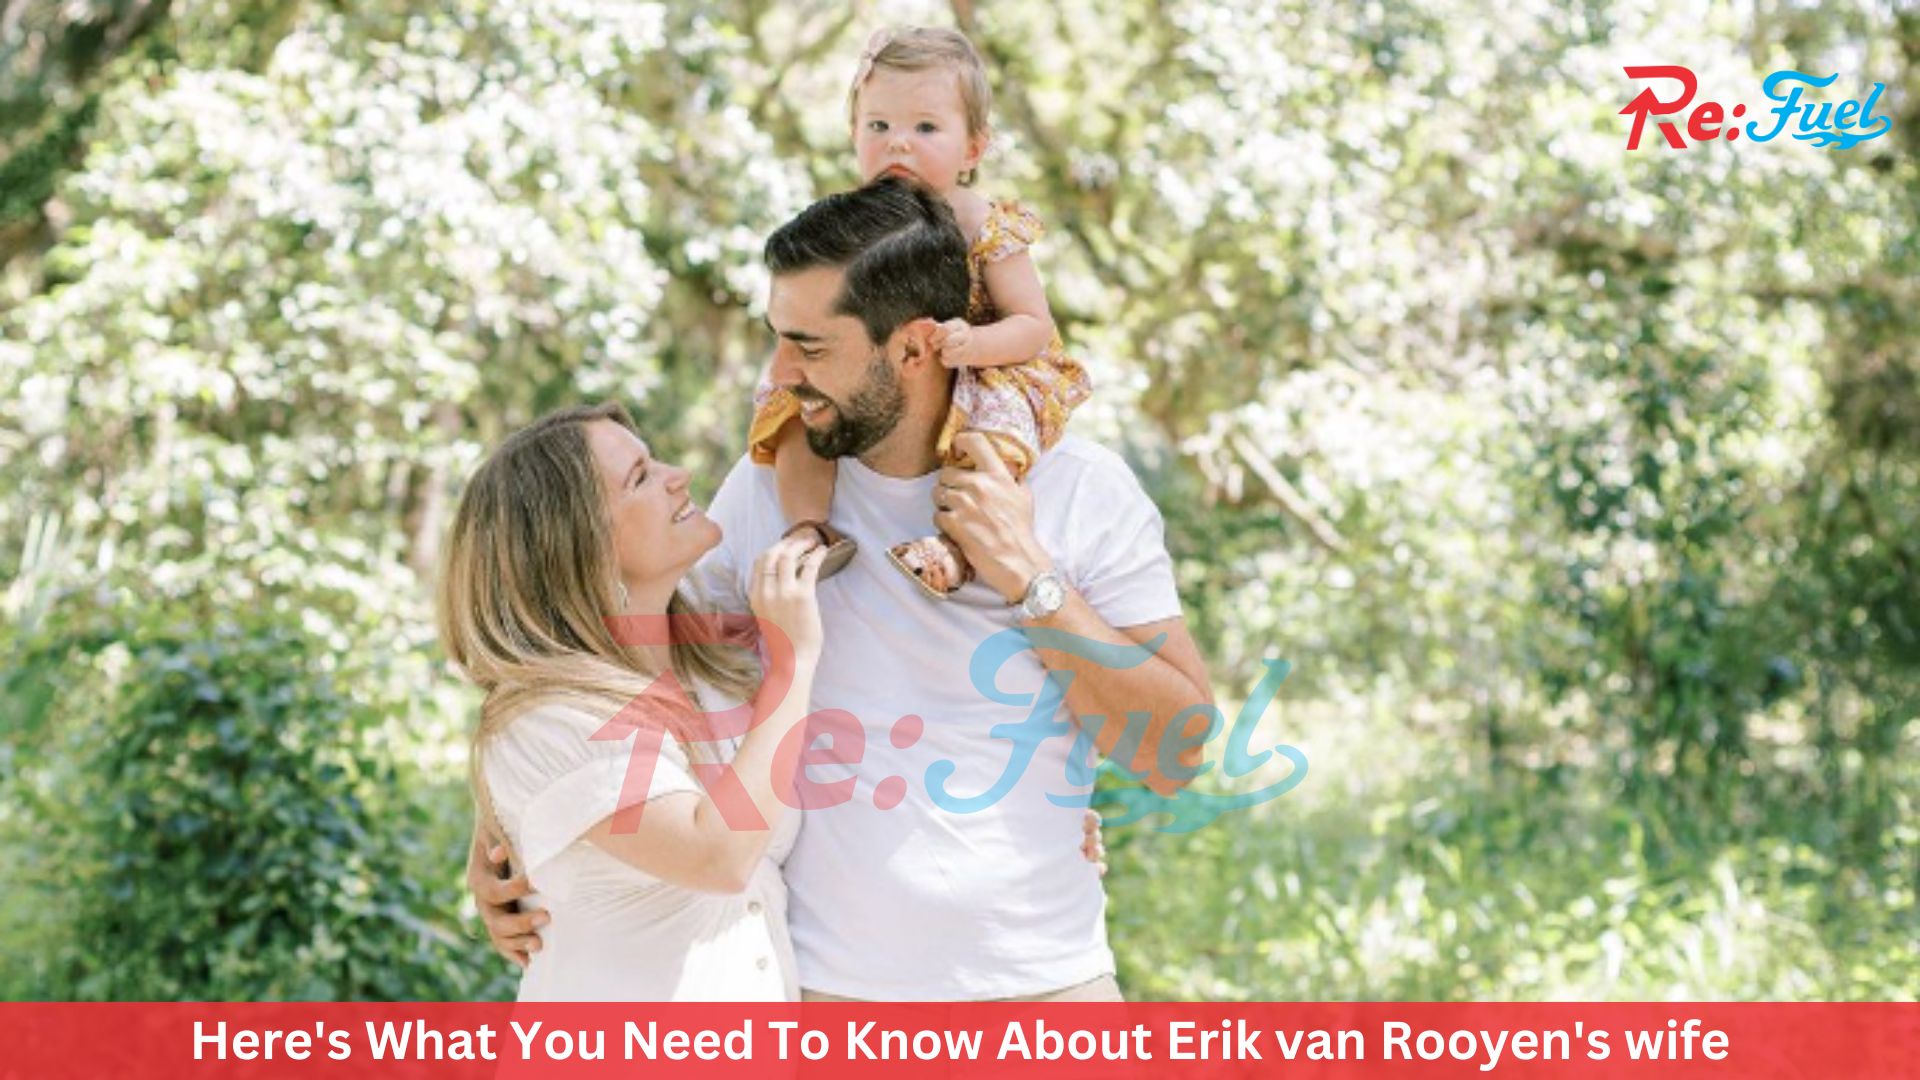 Here's What You Need To Know About Erik van Rooyen's wife